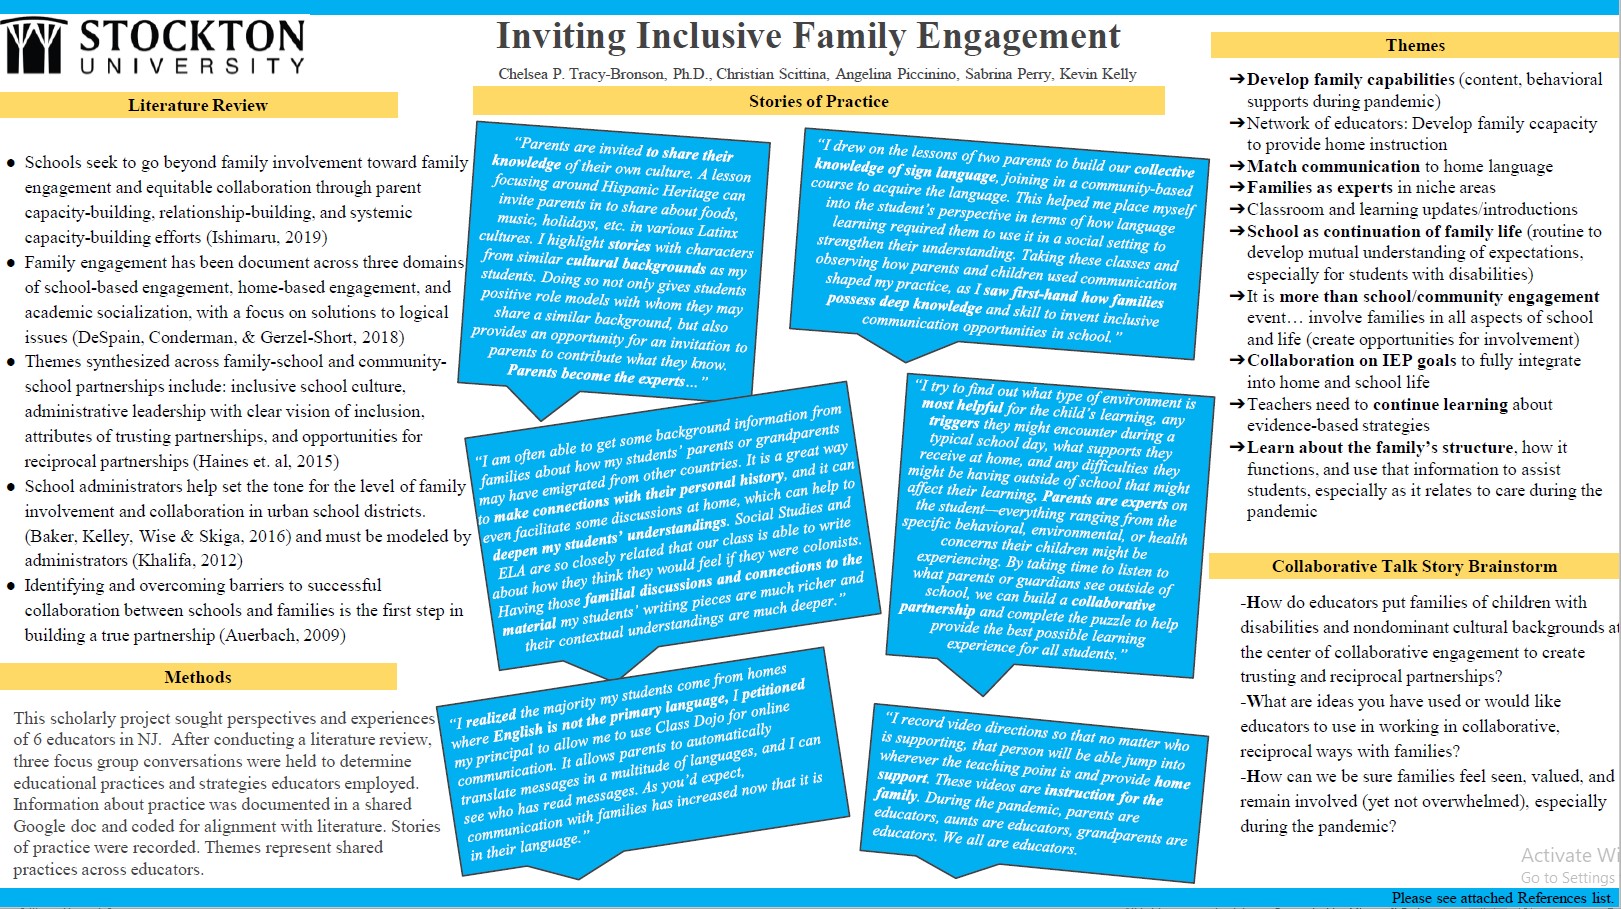 Showcase Image for Inviting Inclusive Family Engagement 